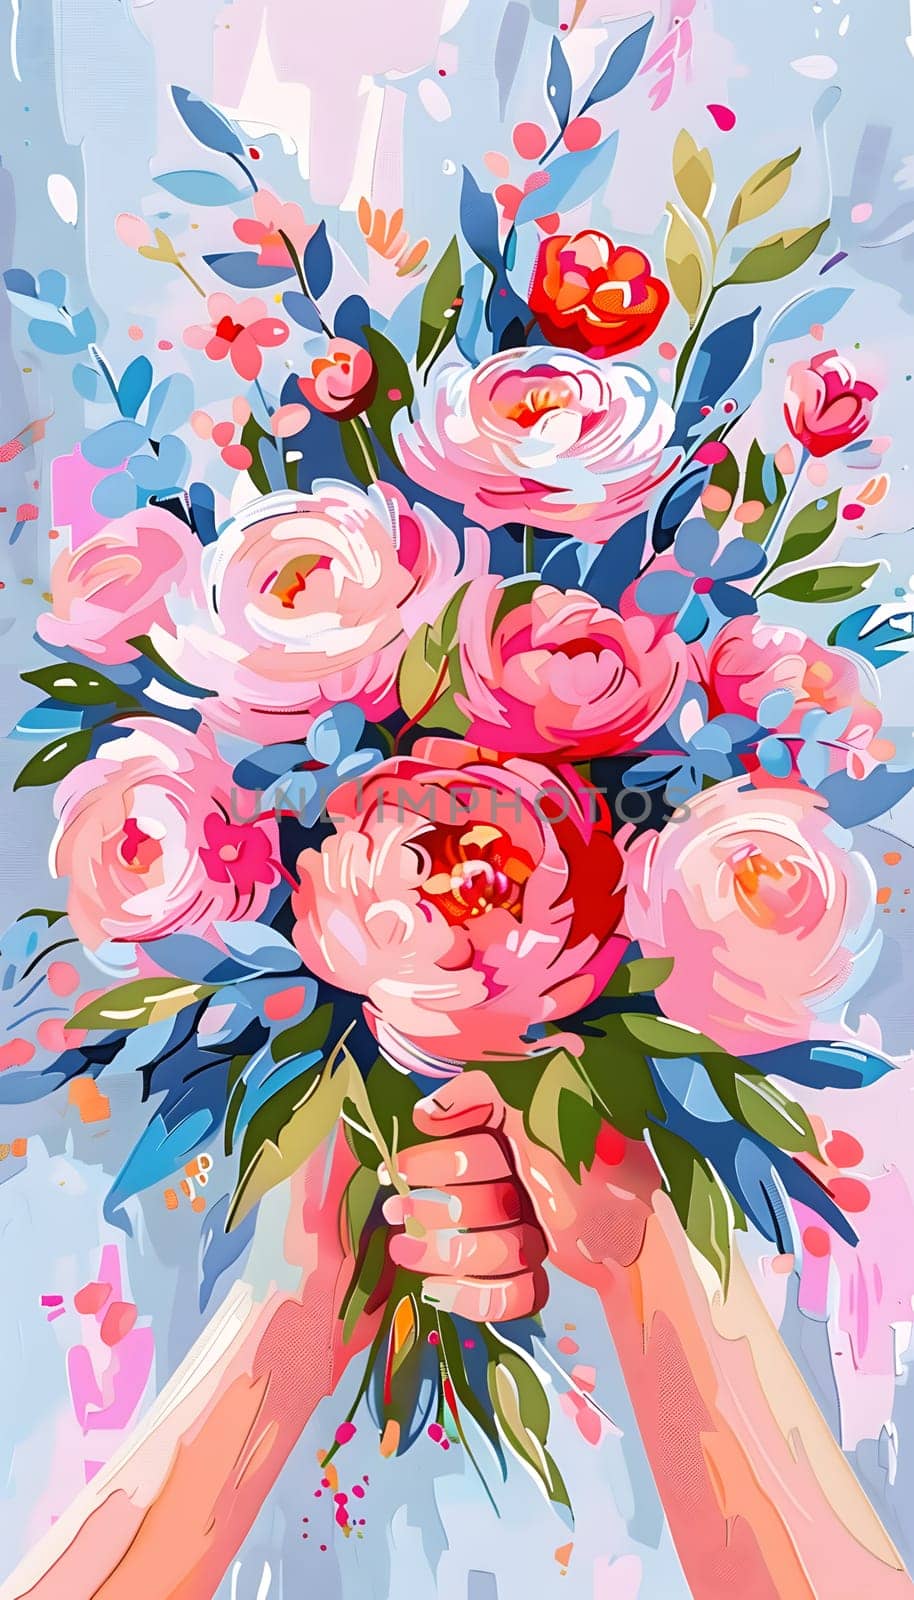 A creative arts painting of hands holding a pink and blue flower bouquet by Nadtochiy